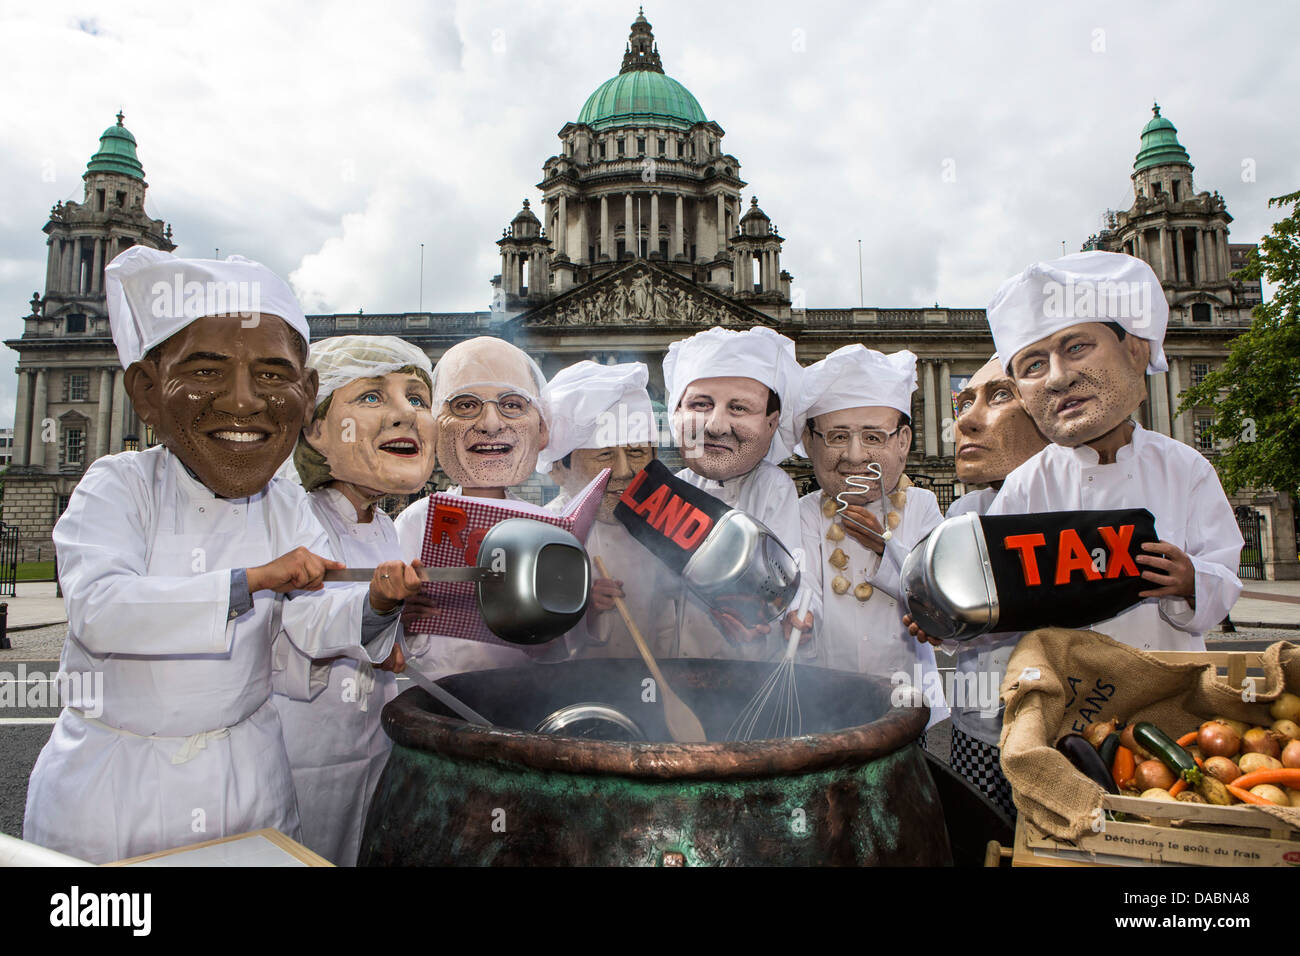 IF campaign. G8 leaders cooking up the right deal to fight hunger and poverty by tackling tax dodging. Stock Photo